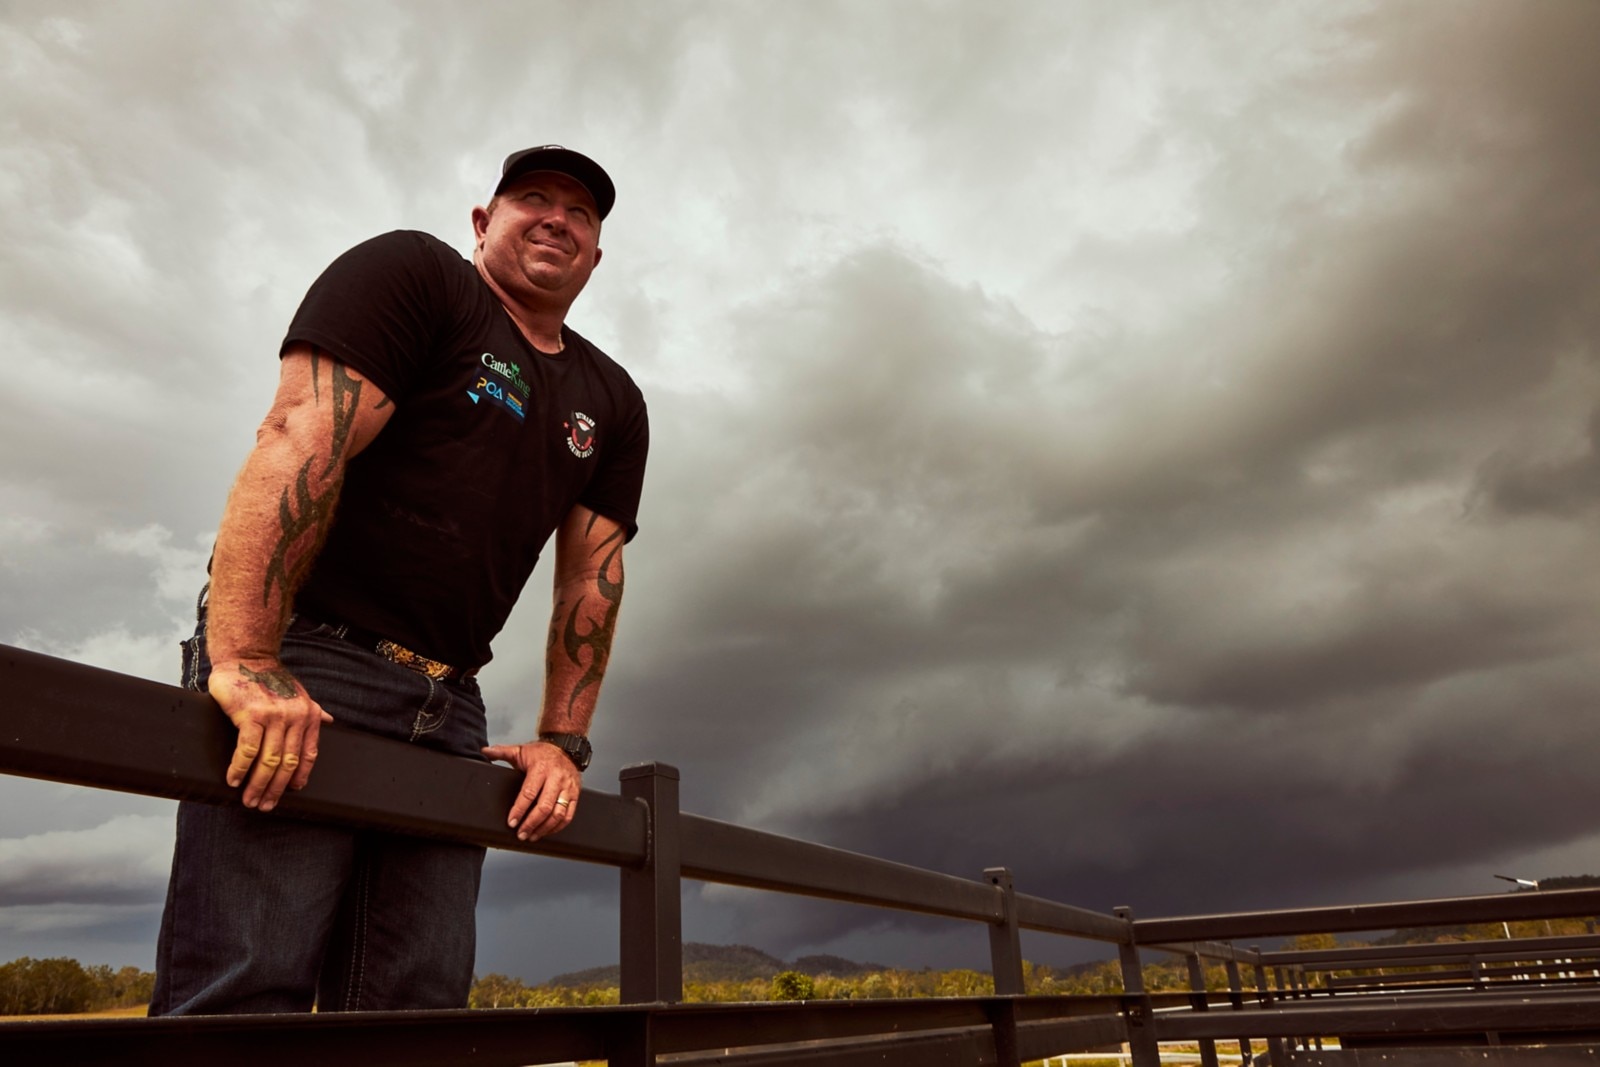 Jason Dittman standing on the bottom of his fence, looking up to dark clouds with sun shining through.